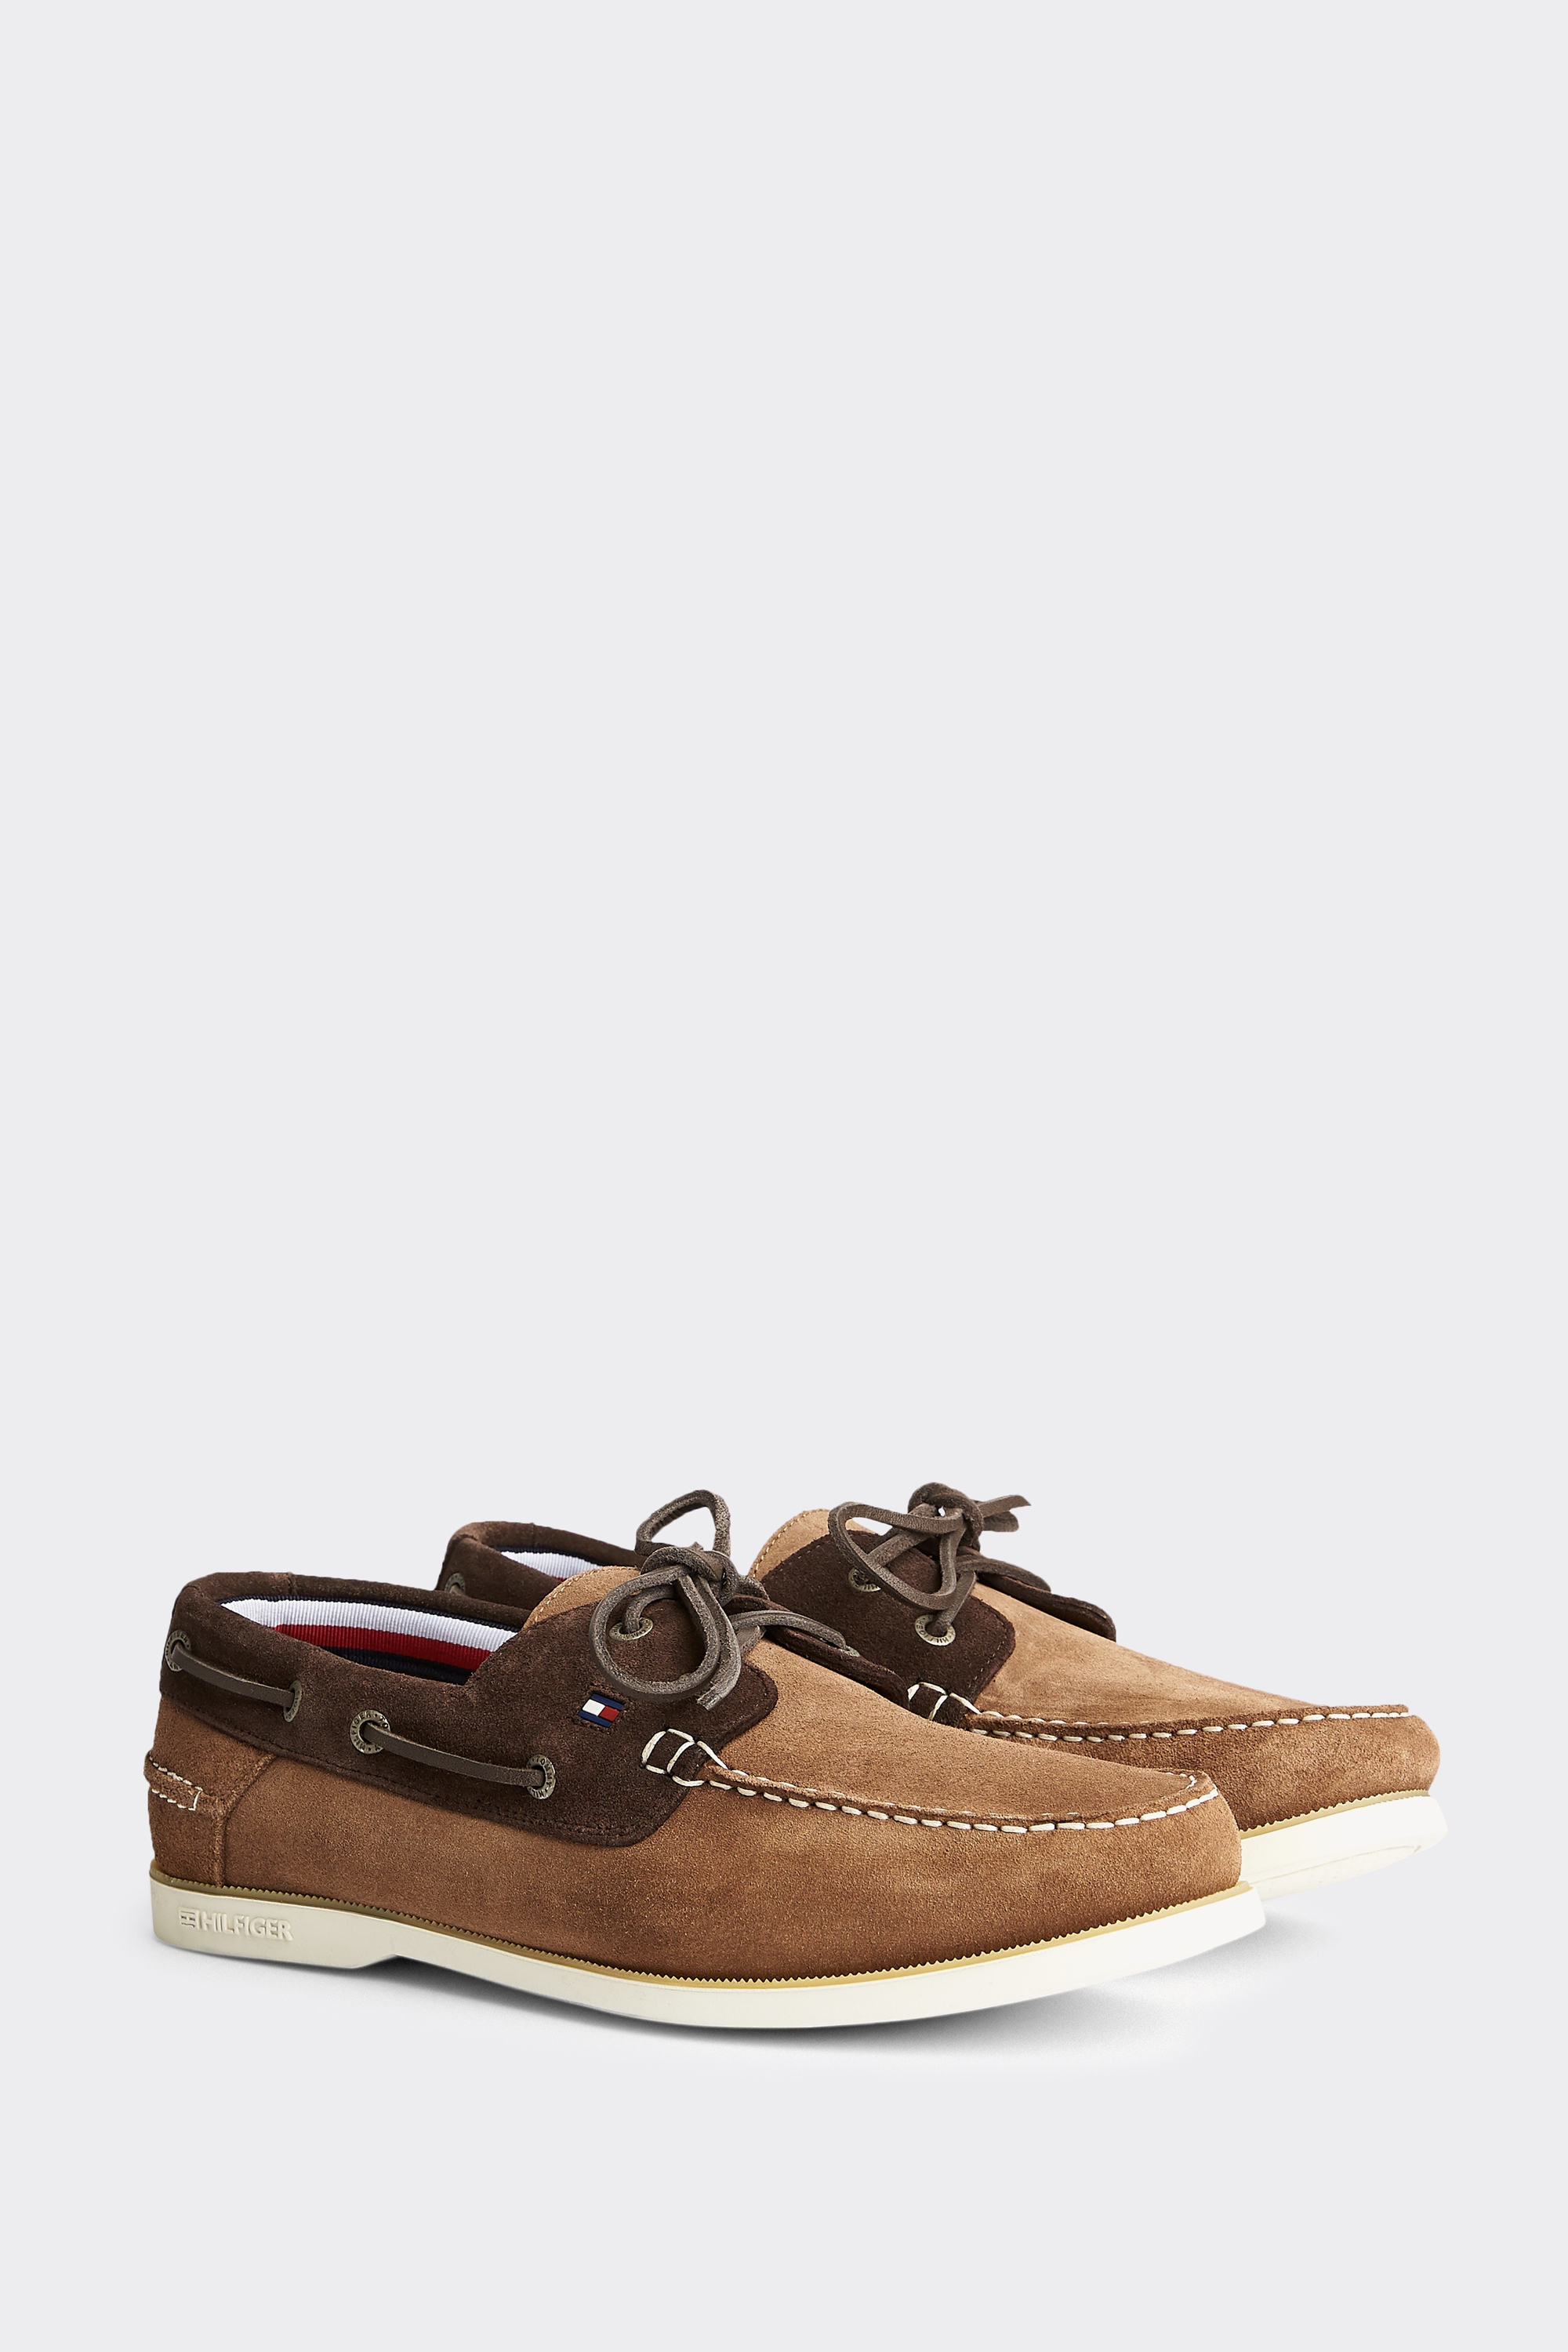 Tommy Hilfiger Khaki Classic Suede Boat 